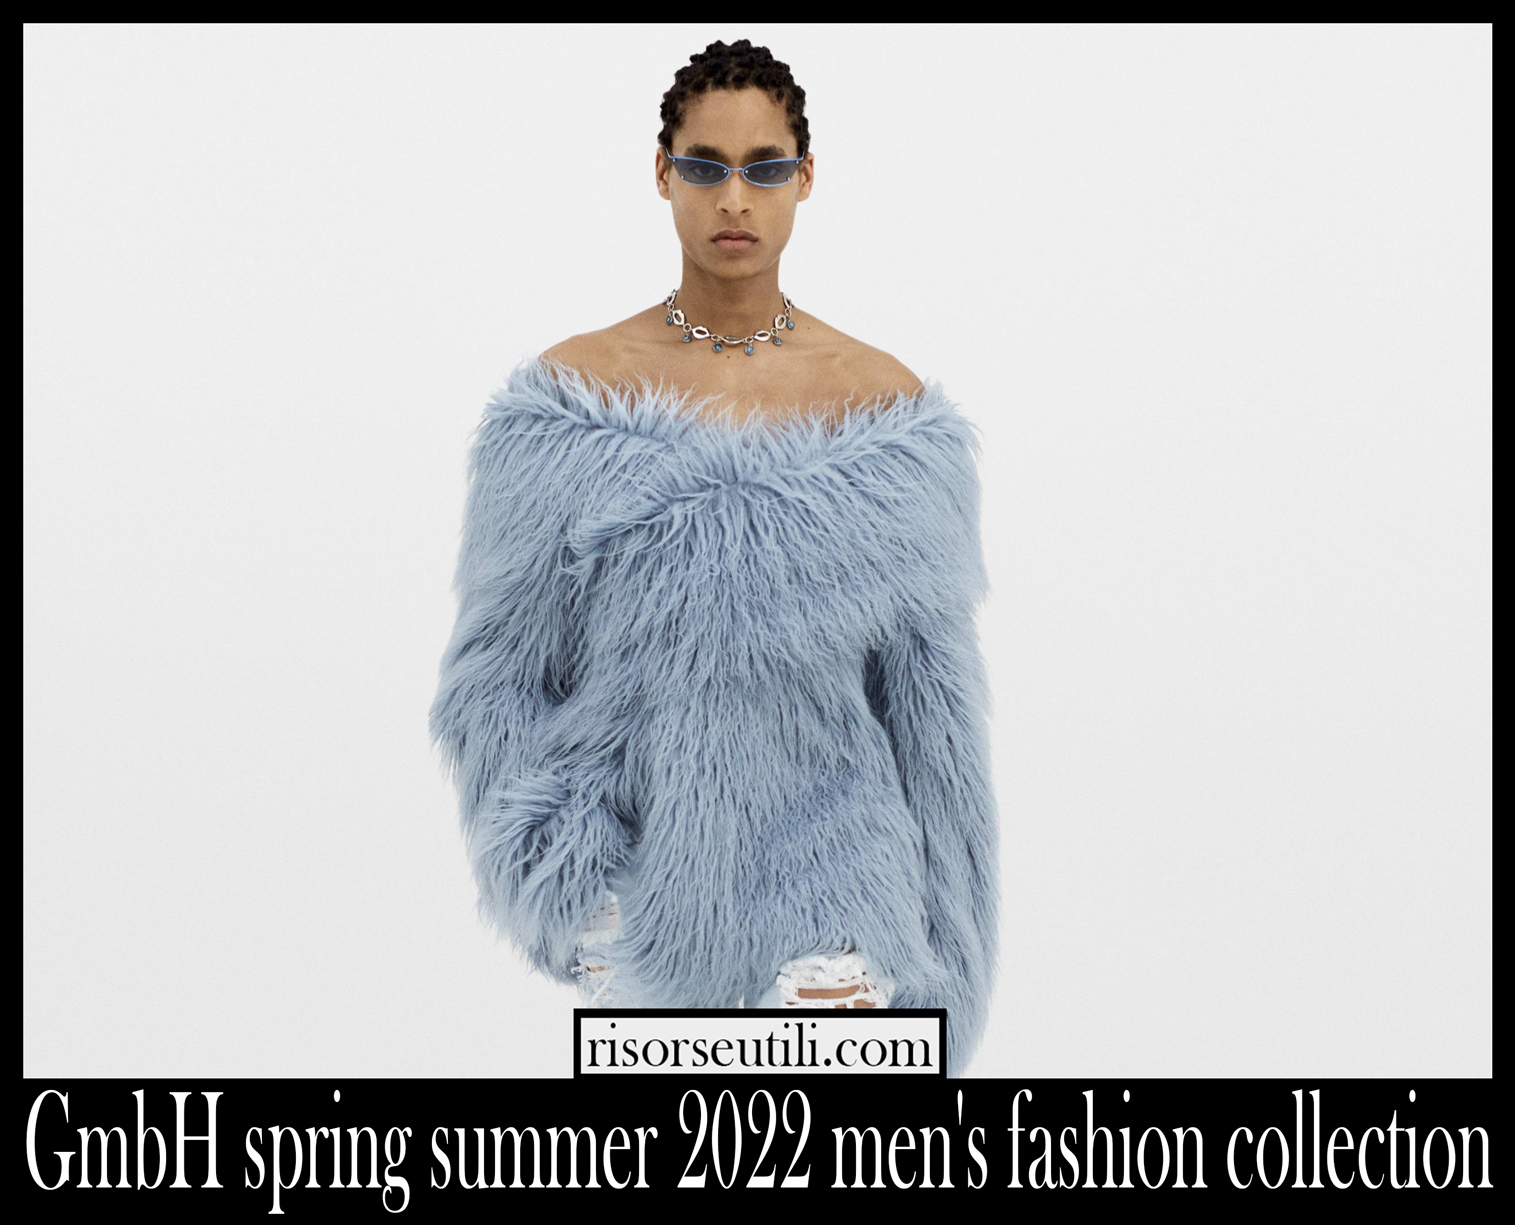 GmbH spring summer 2022 mens fashion collection